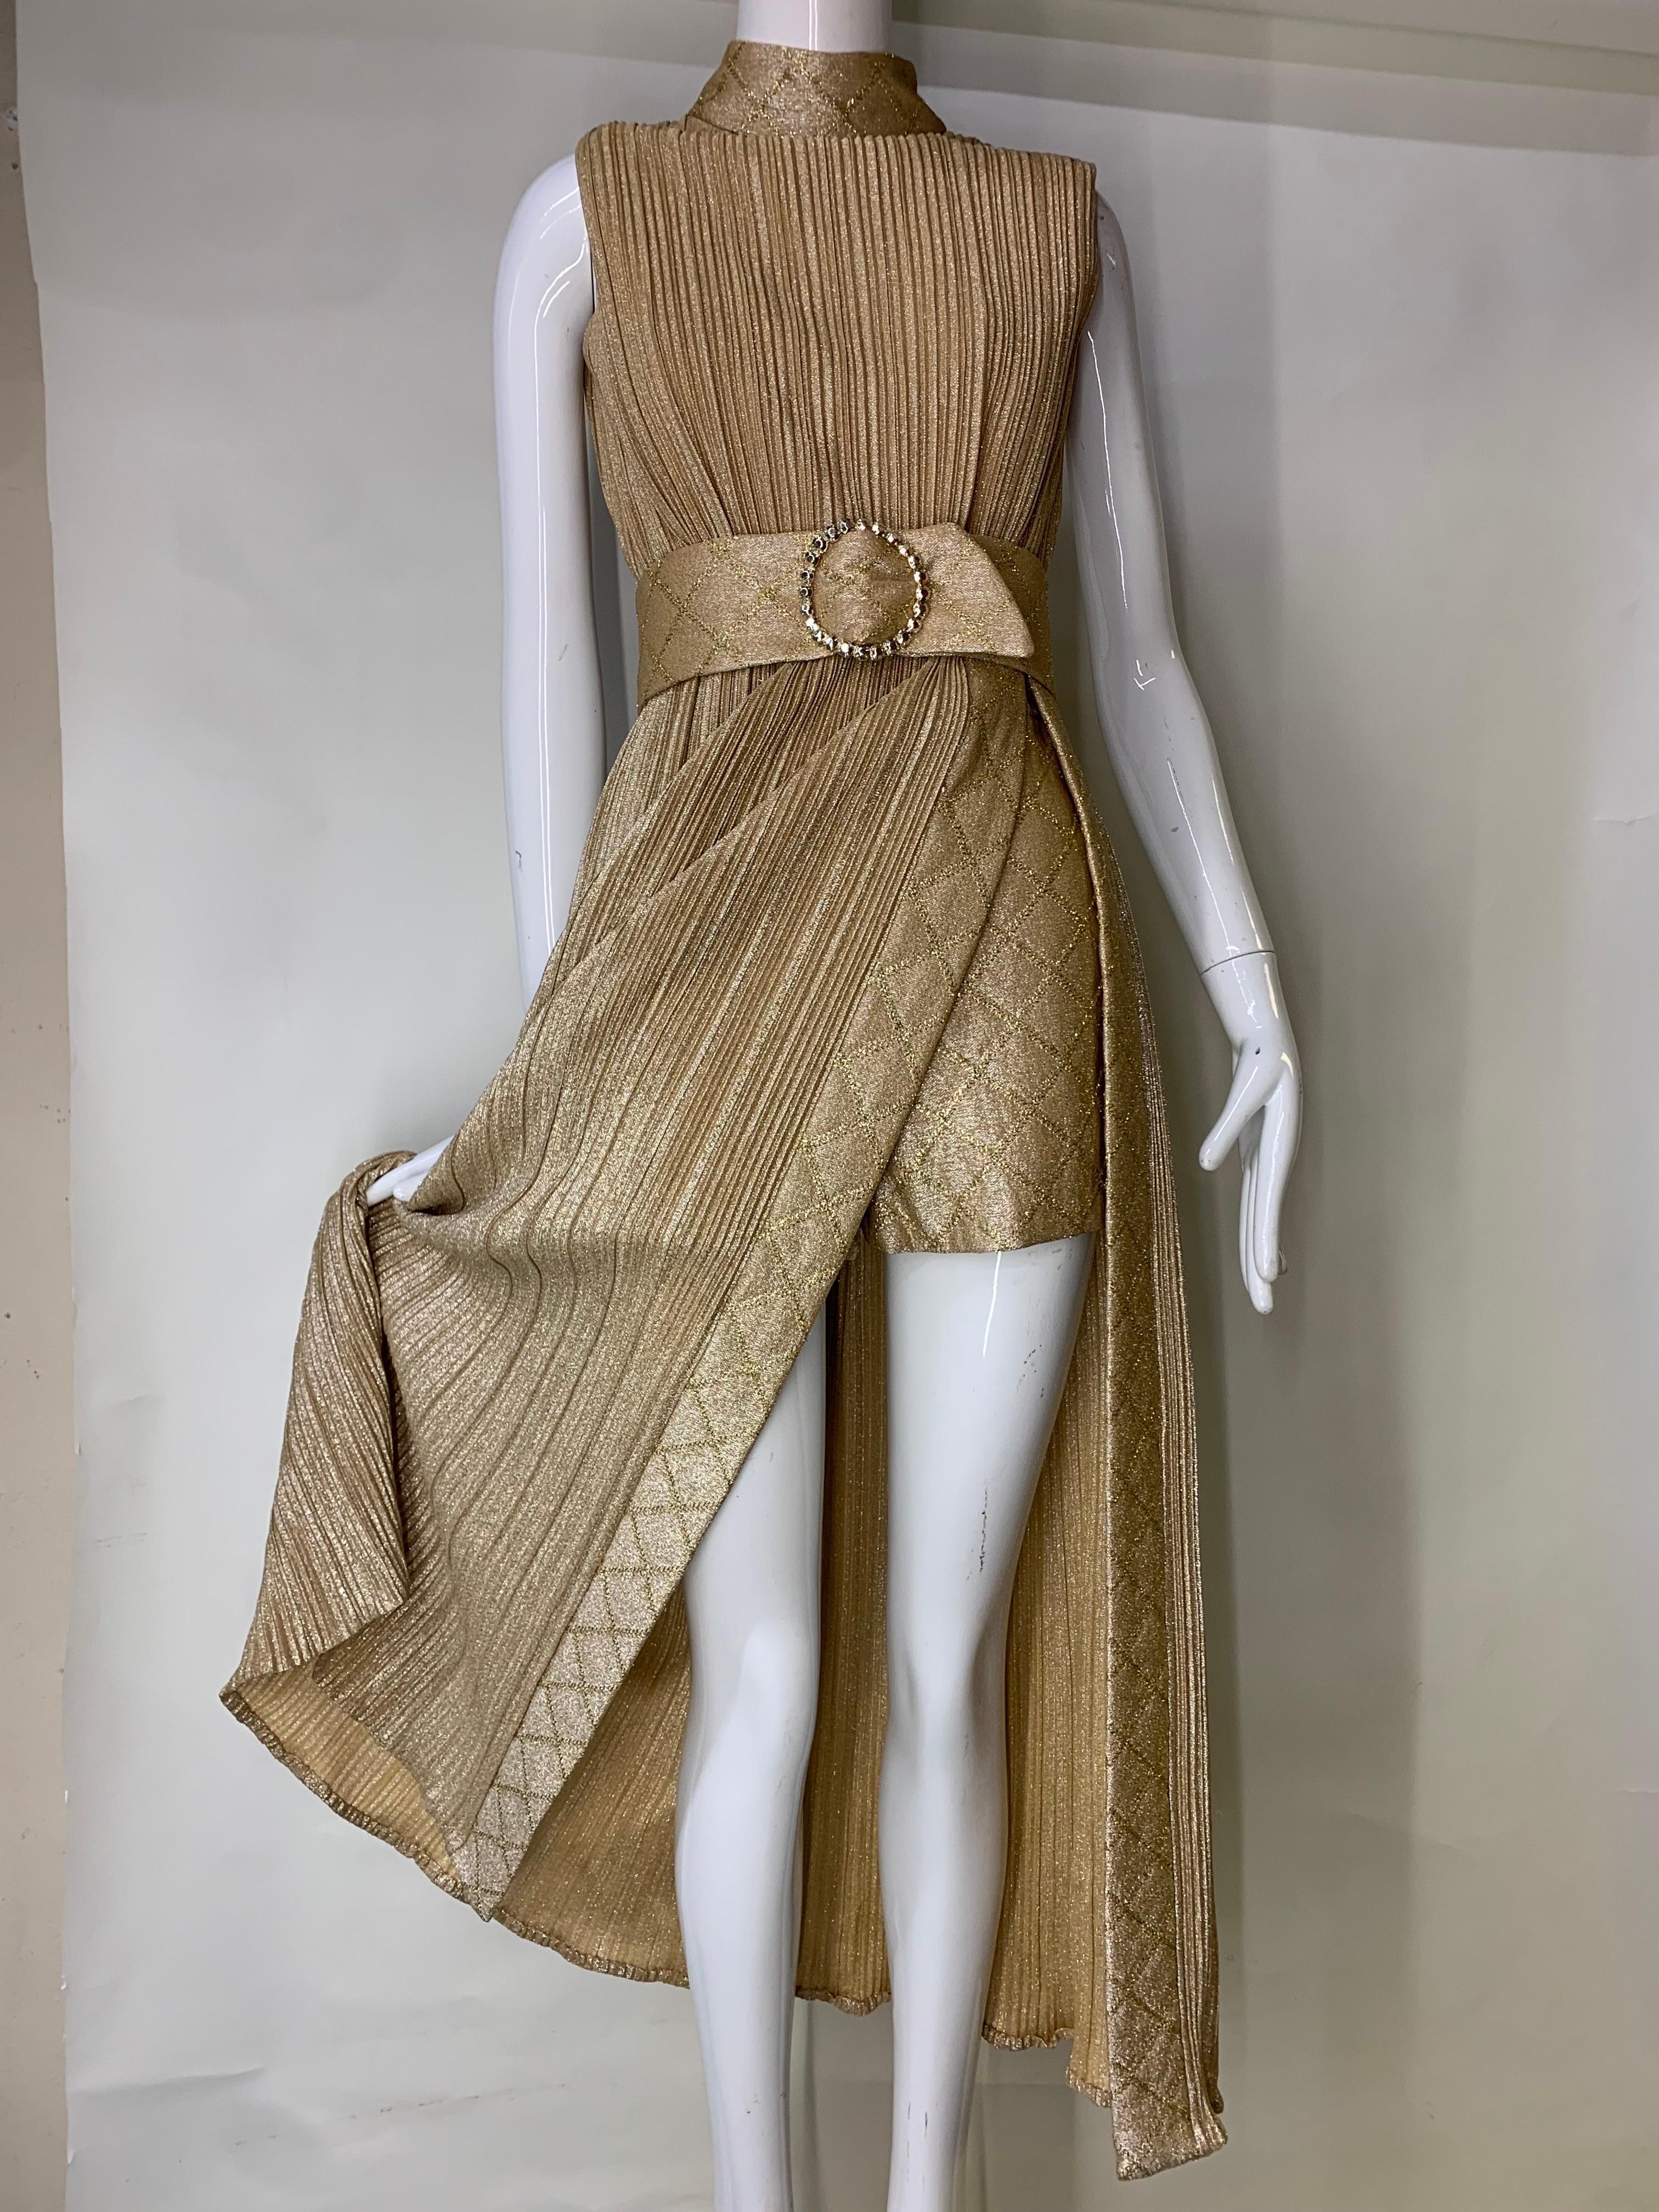 1960s Gold Lame Knit Tunic and Matching Quilted Lame Hot Pants Ensemble:  Micro-pleated gold lurex tunic in a Mod/Grecian style with high side opening revealing coordinating gold quilted hot pants with rhinestone buckle belt. Back zipper. US size 4. 